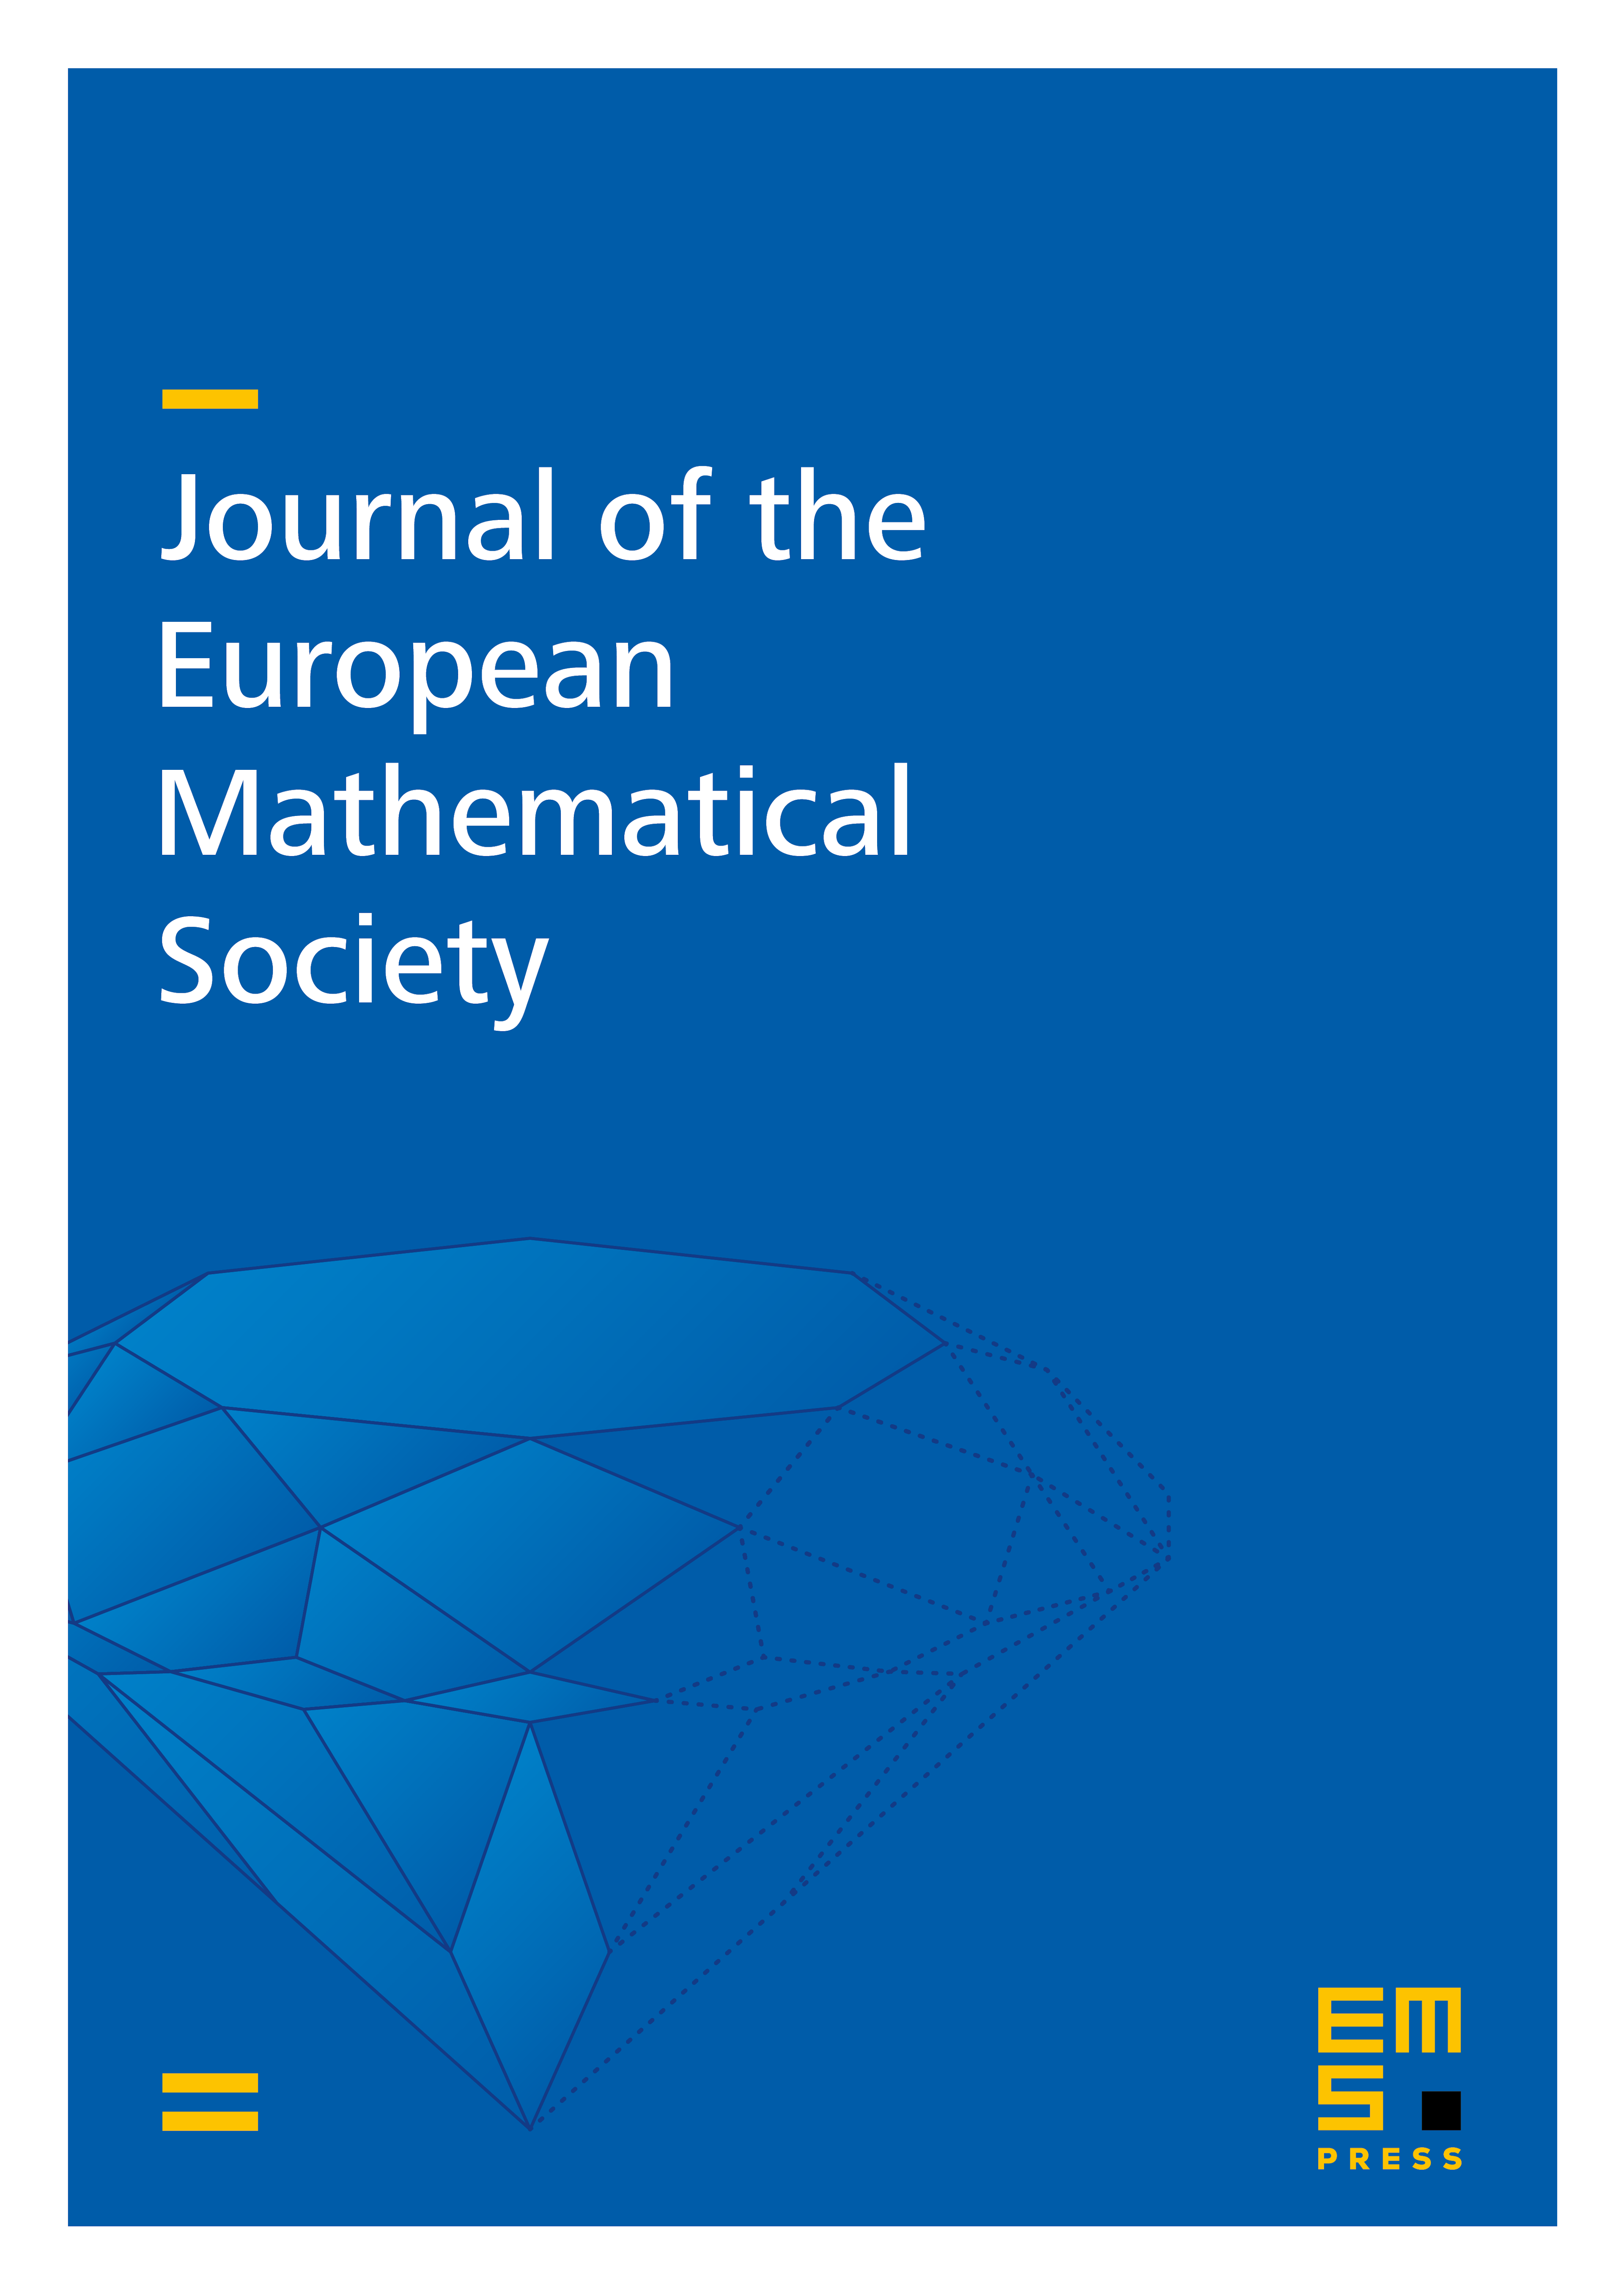 Sharp isoperimetric inequalities and model spaces for the Curvature-Dimension-Diameter condition cover